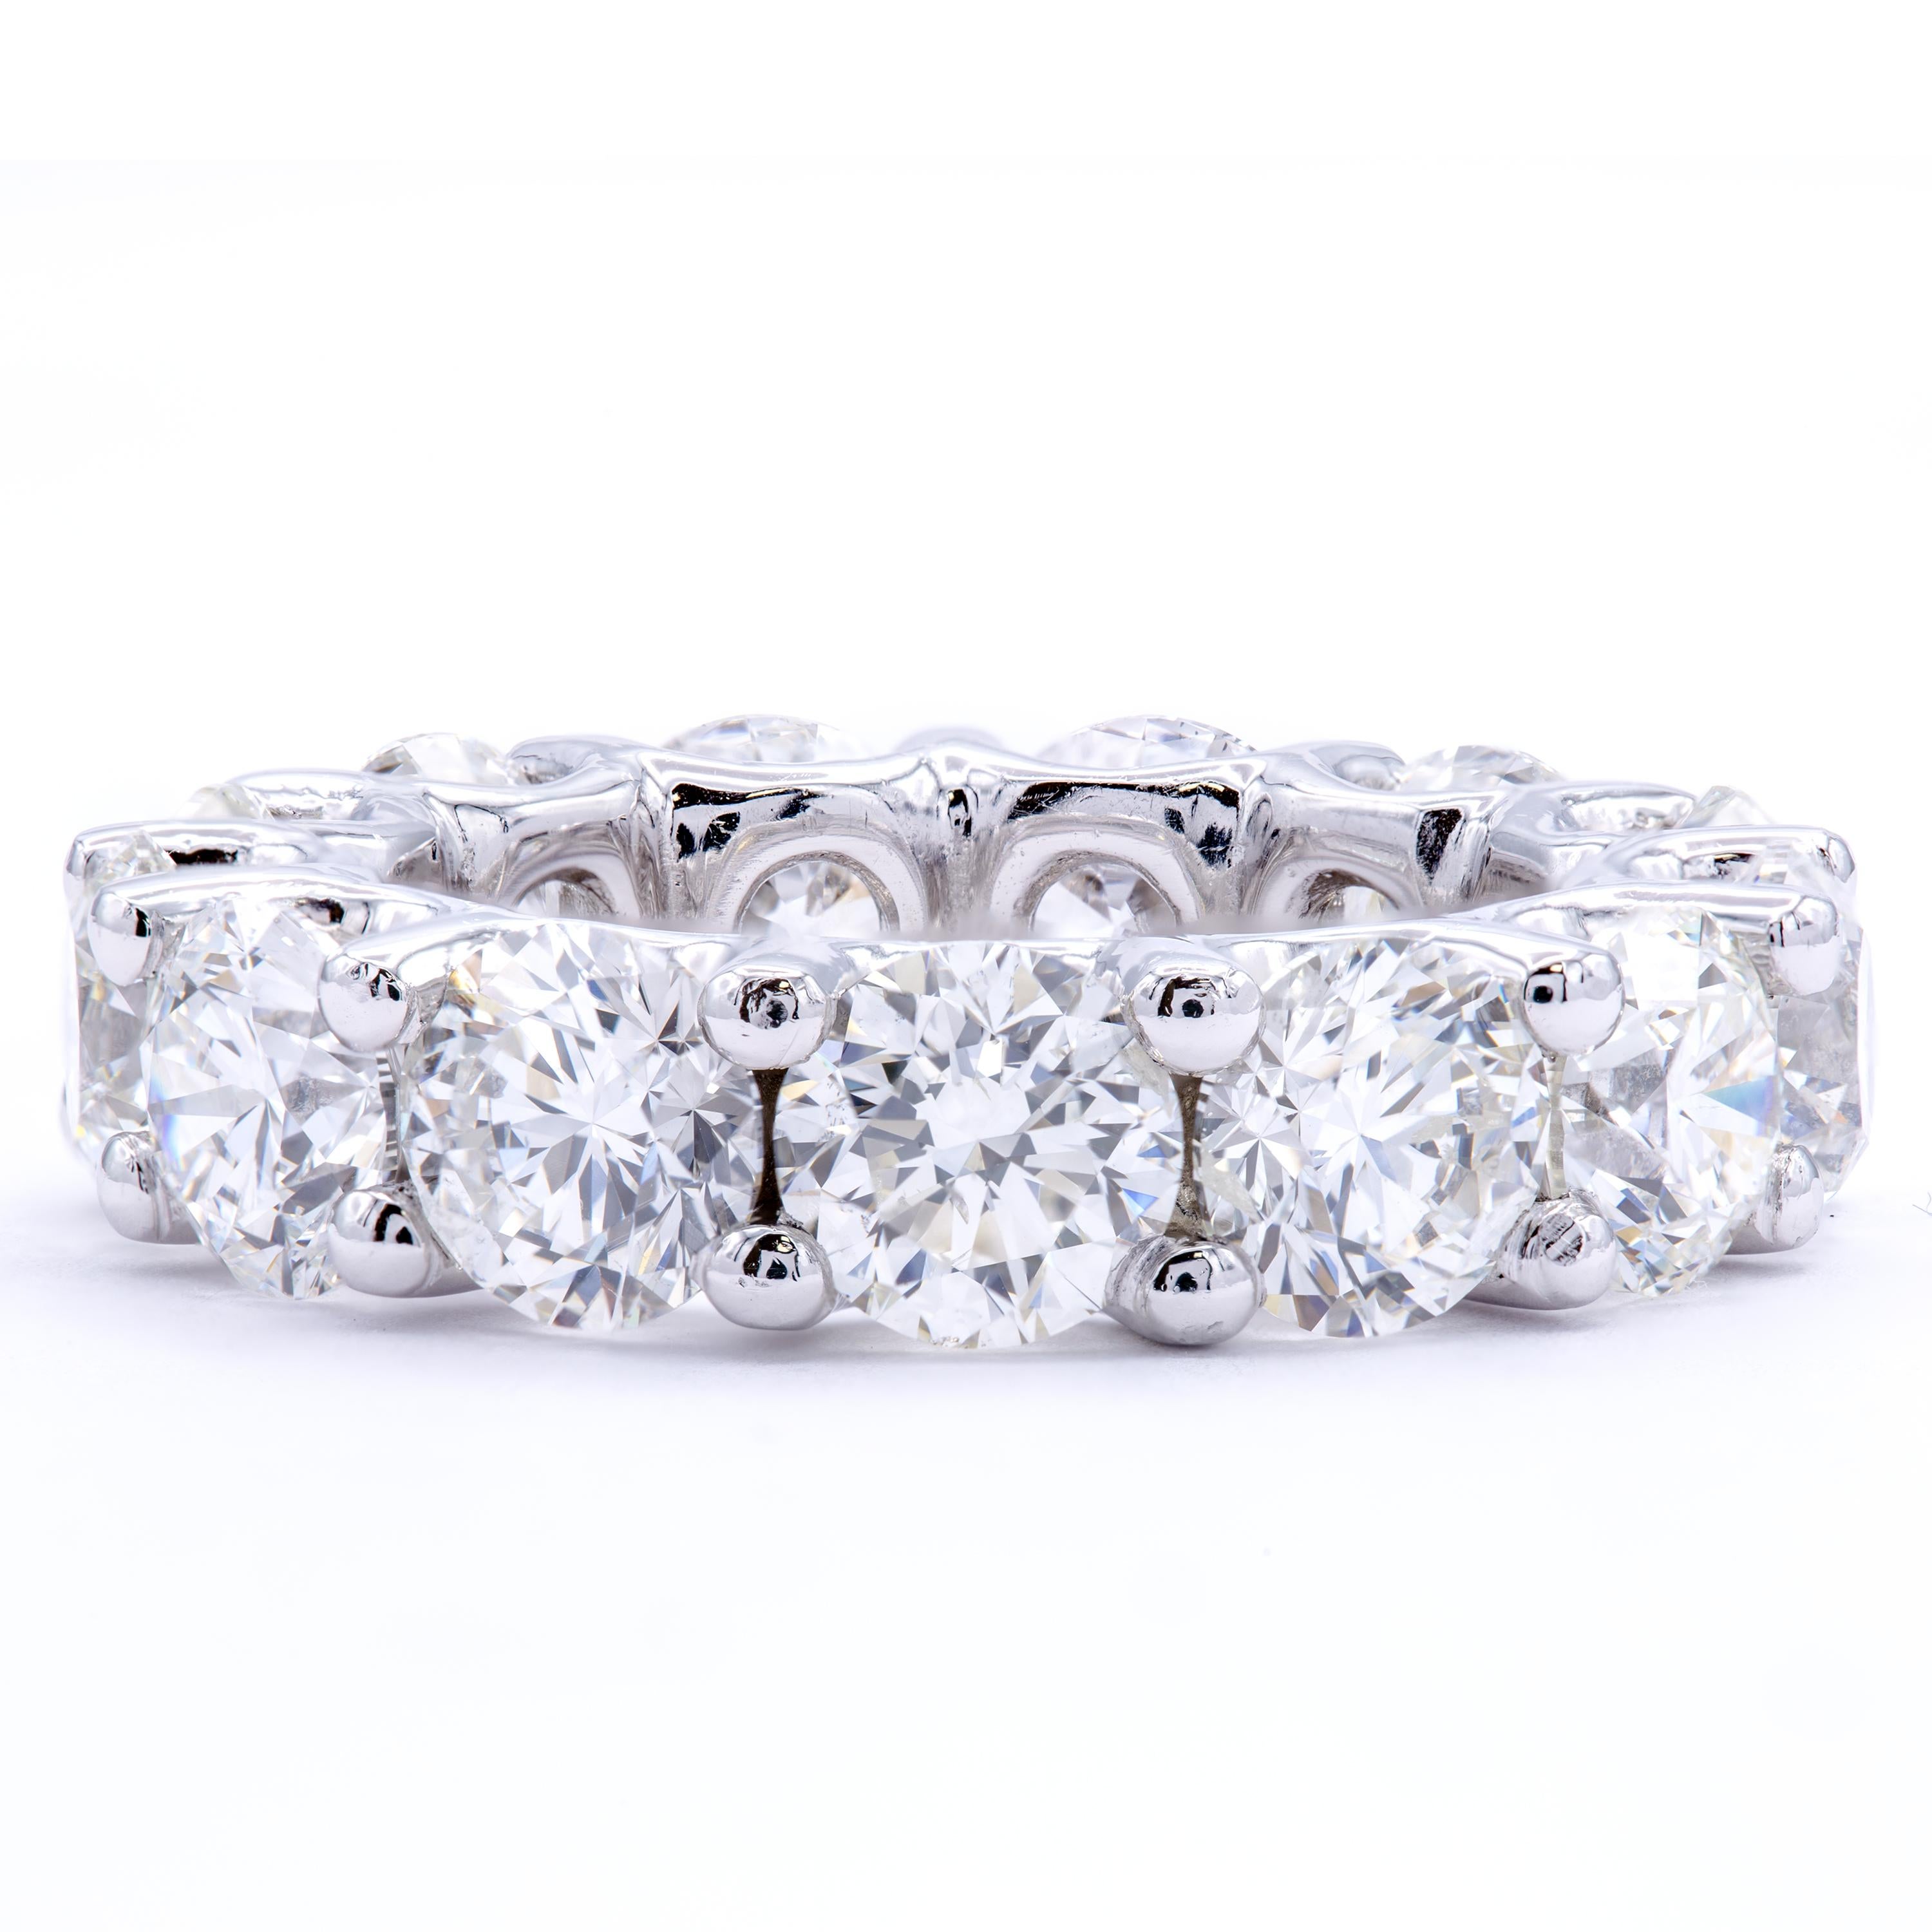 An elegant classic, timeless in its overwhelming beauty made even more so with exceptional diamonds from Rosenberg Diamonds & Co. This diamond eternity band shows a band of bright platinum embracing 9.75 carats of round brilliant diamonds. Each of